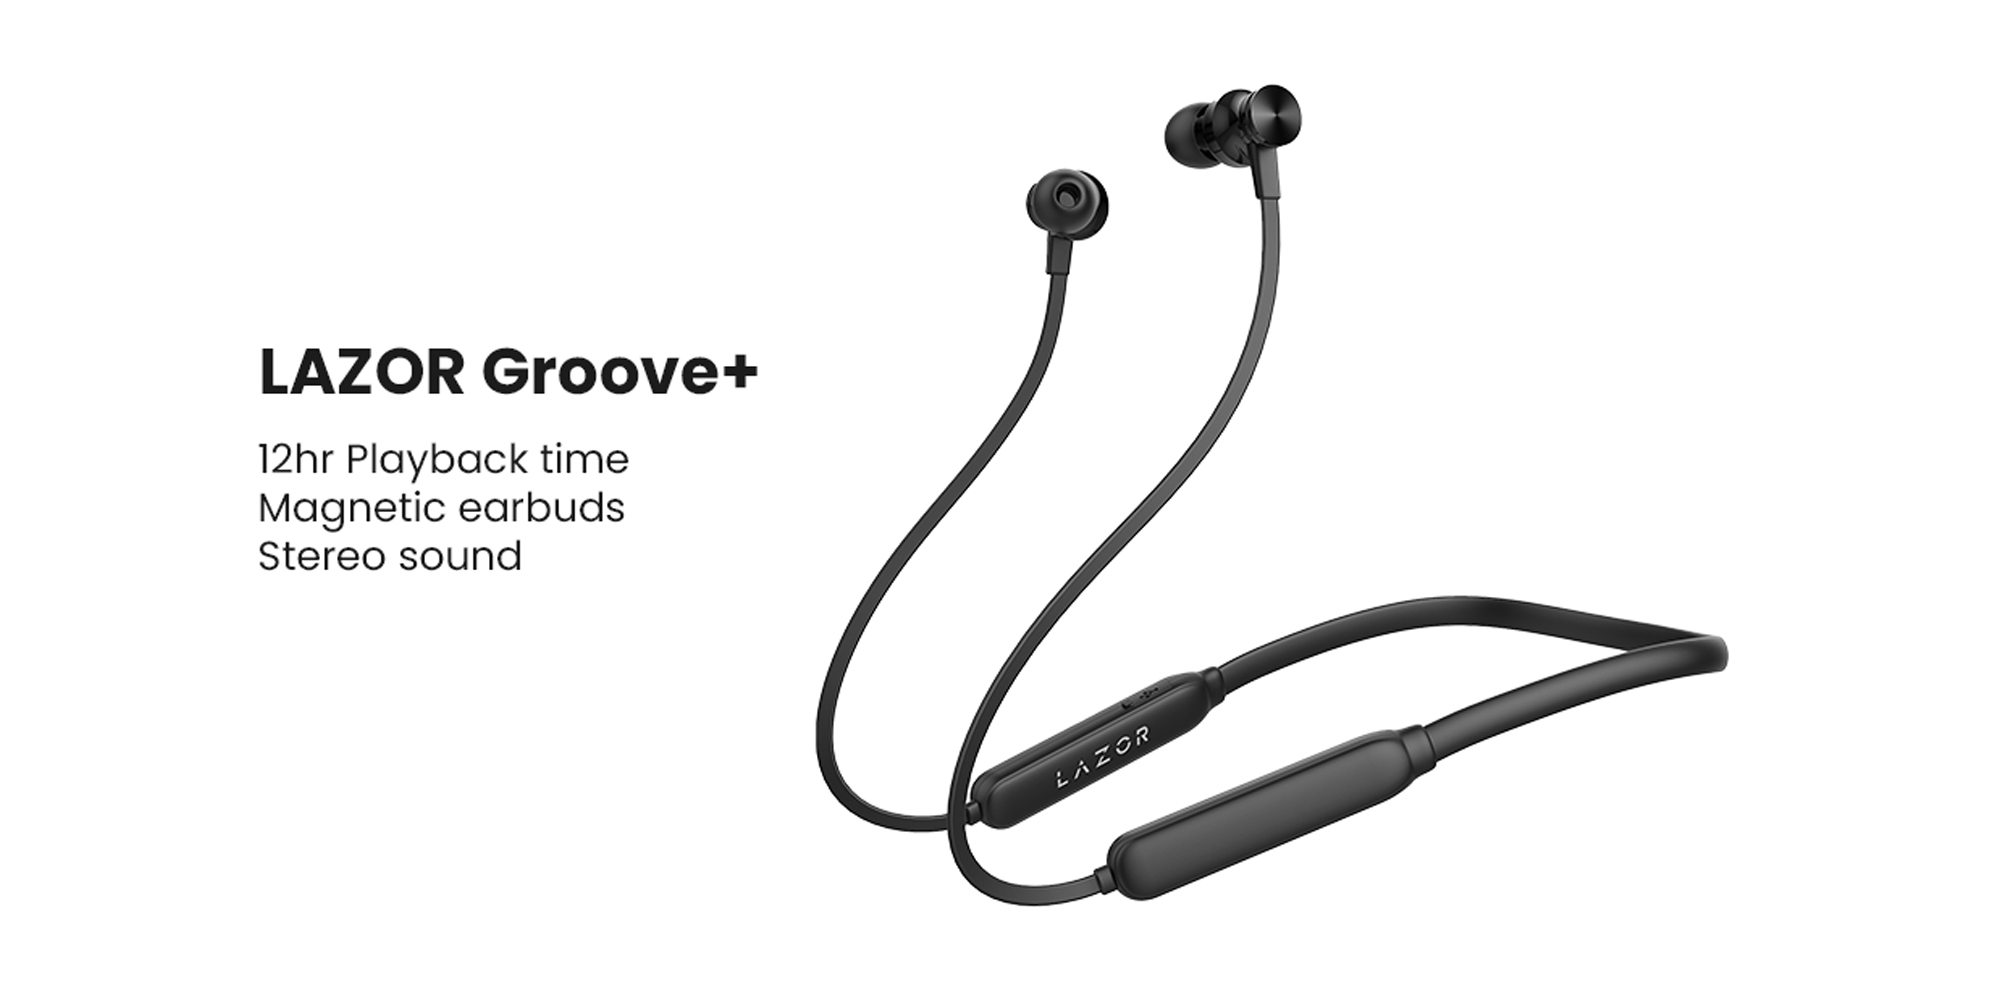 LAZOR Groove+ EA65: Wireless Neckband In-Ear Earphones with Stereo sound, Magnetic earbuds, Up to 12 hrs playback time, Multifunction control, Bluetooth version 5.0, Black